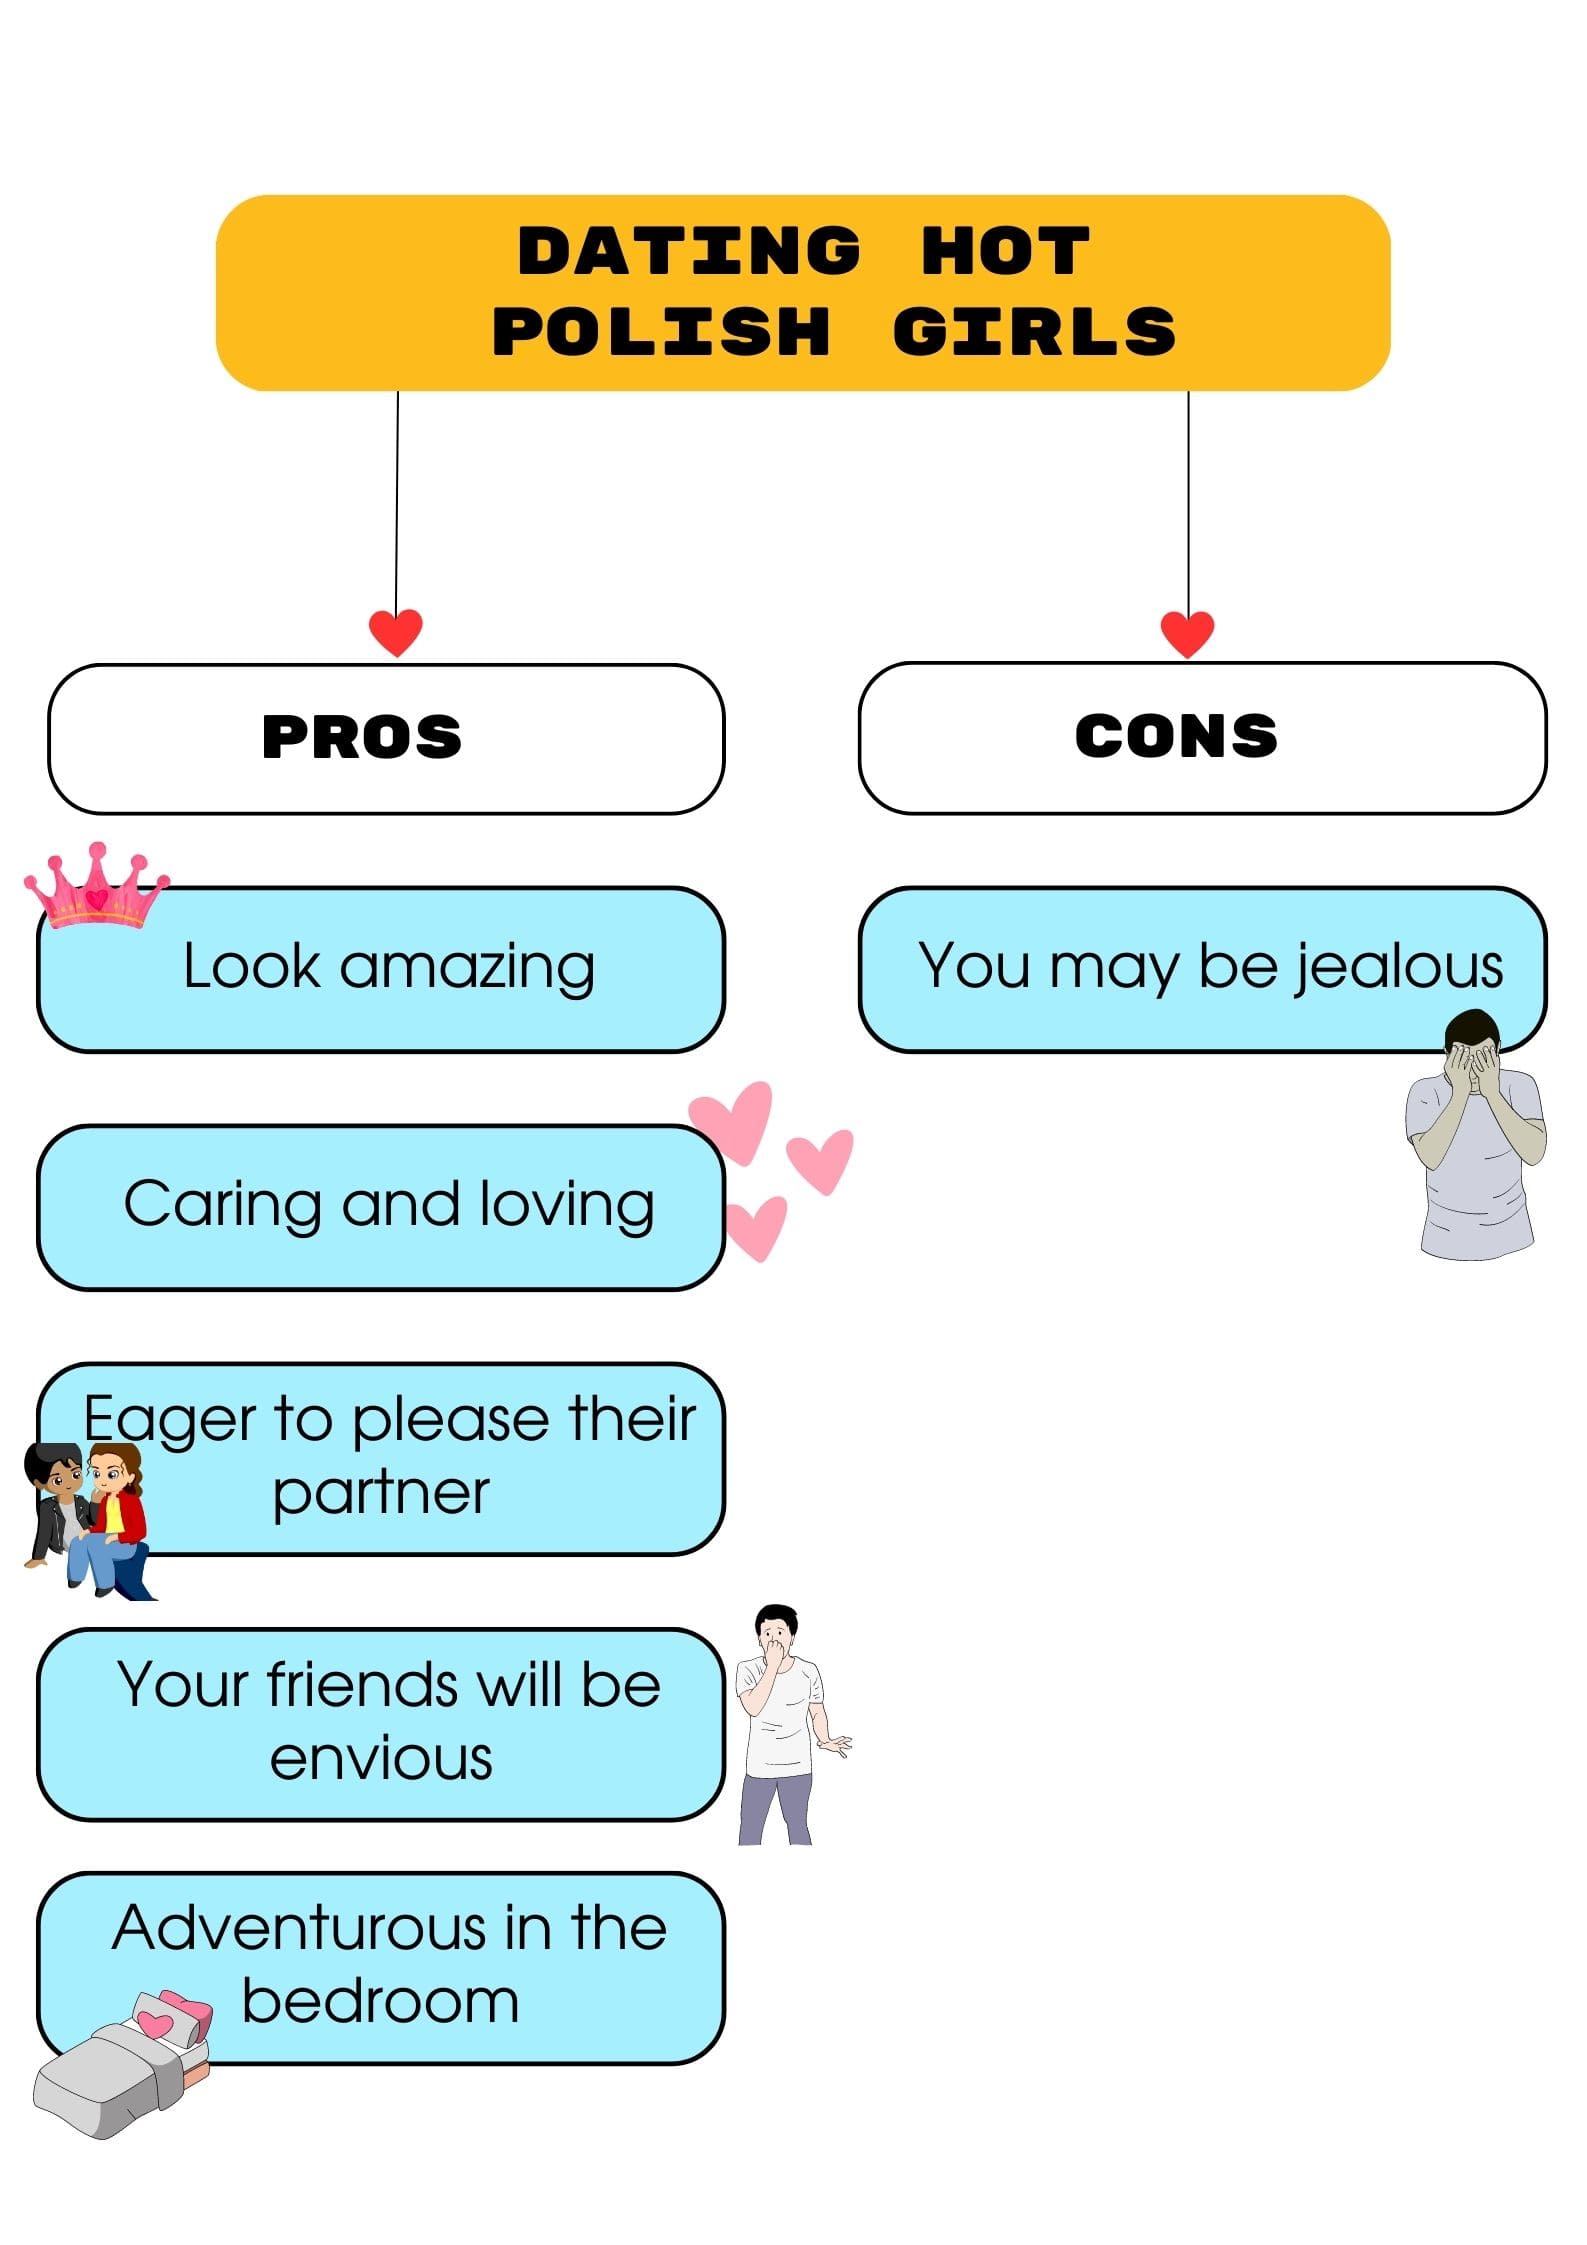 dating polish hot woman pros and cons